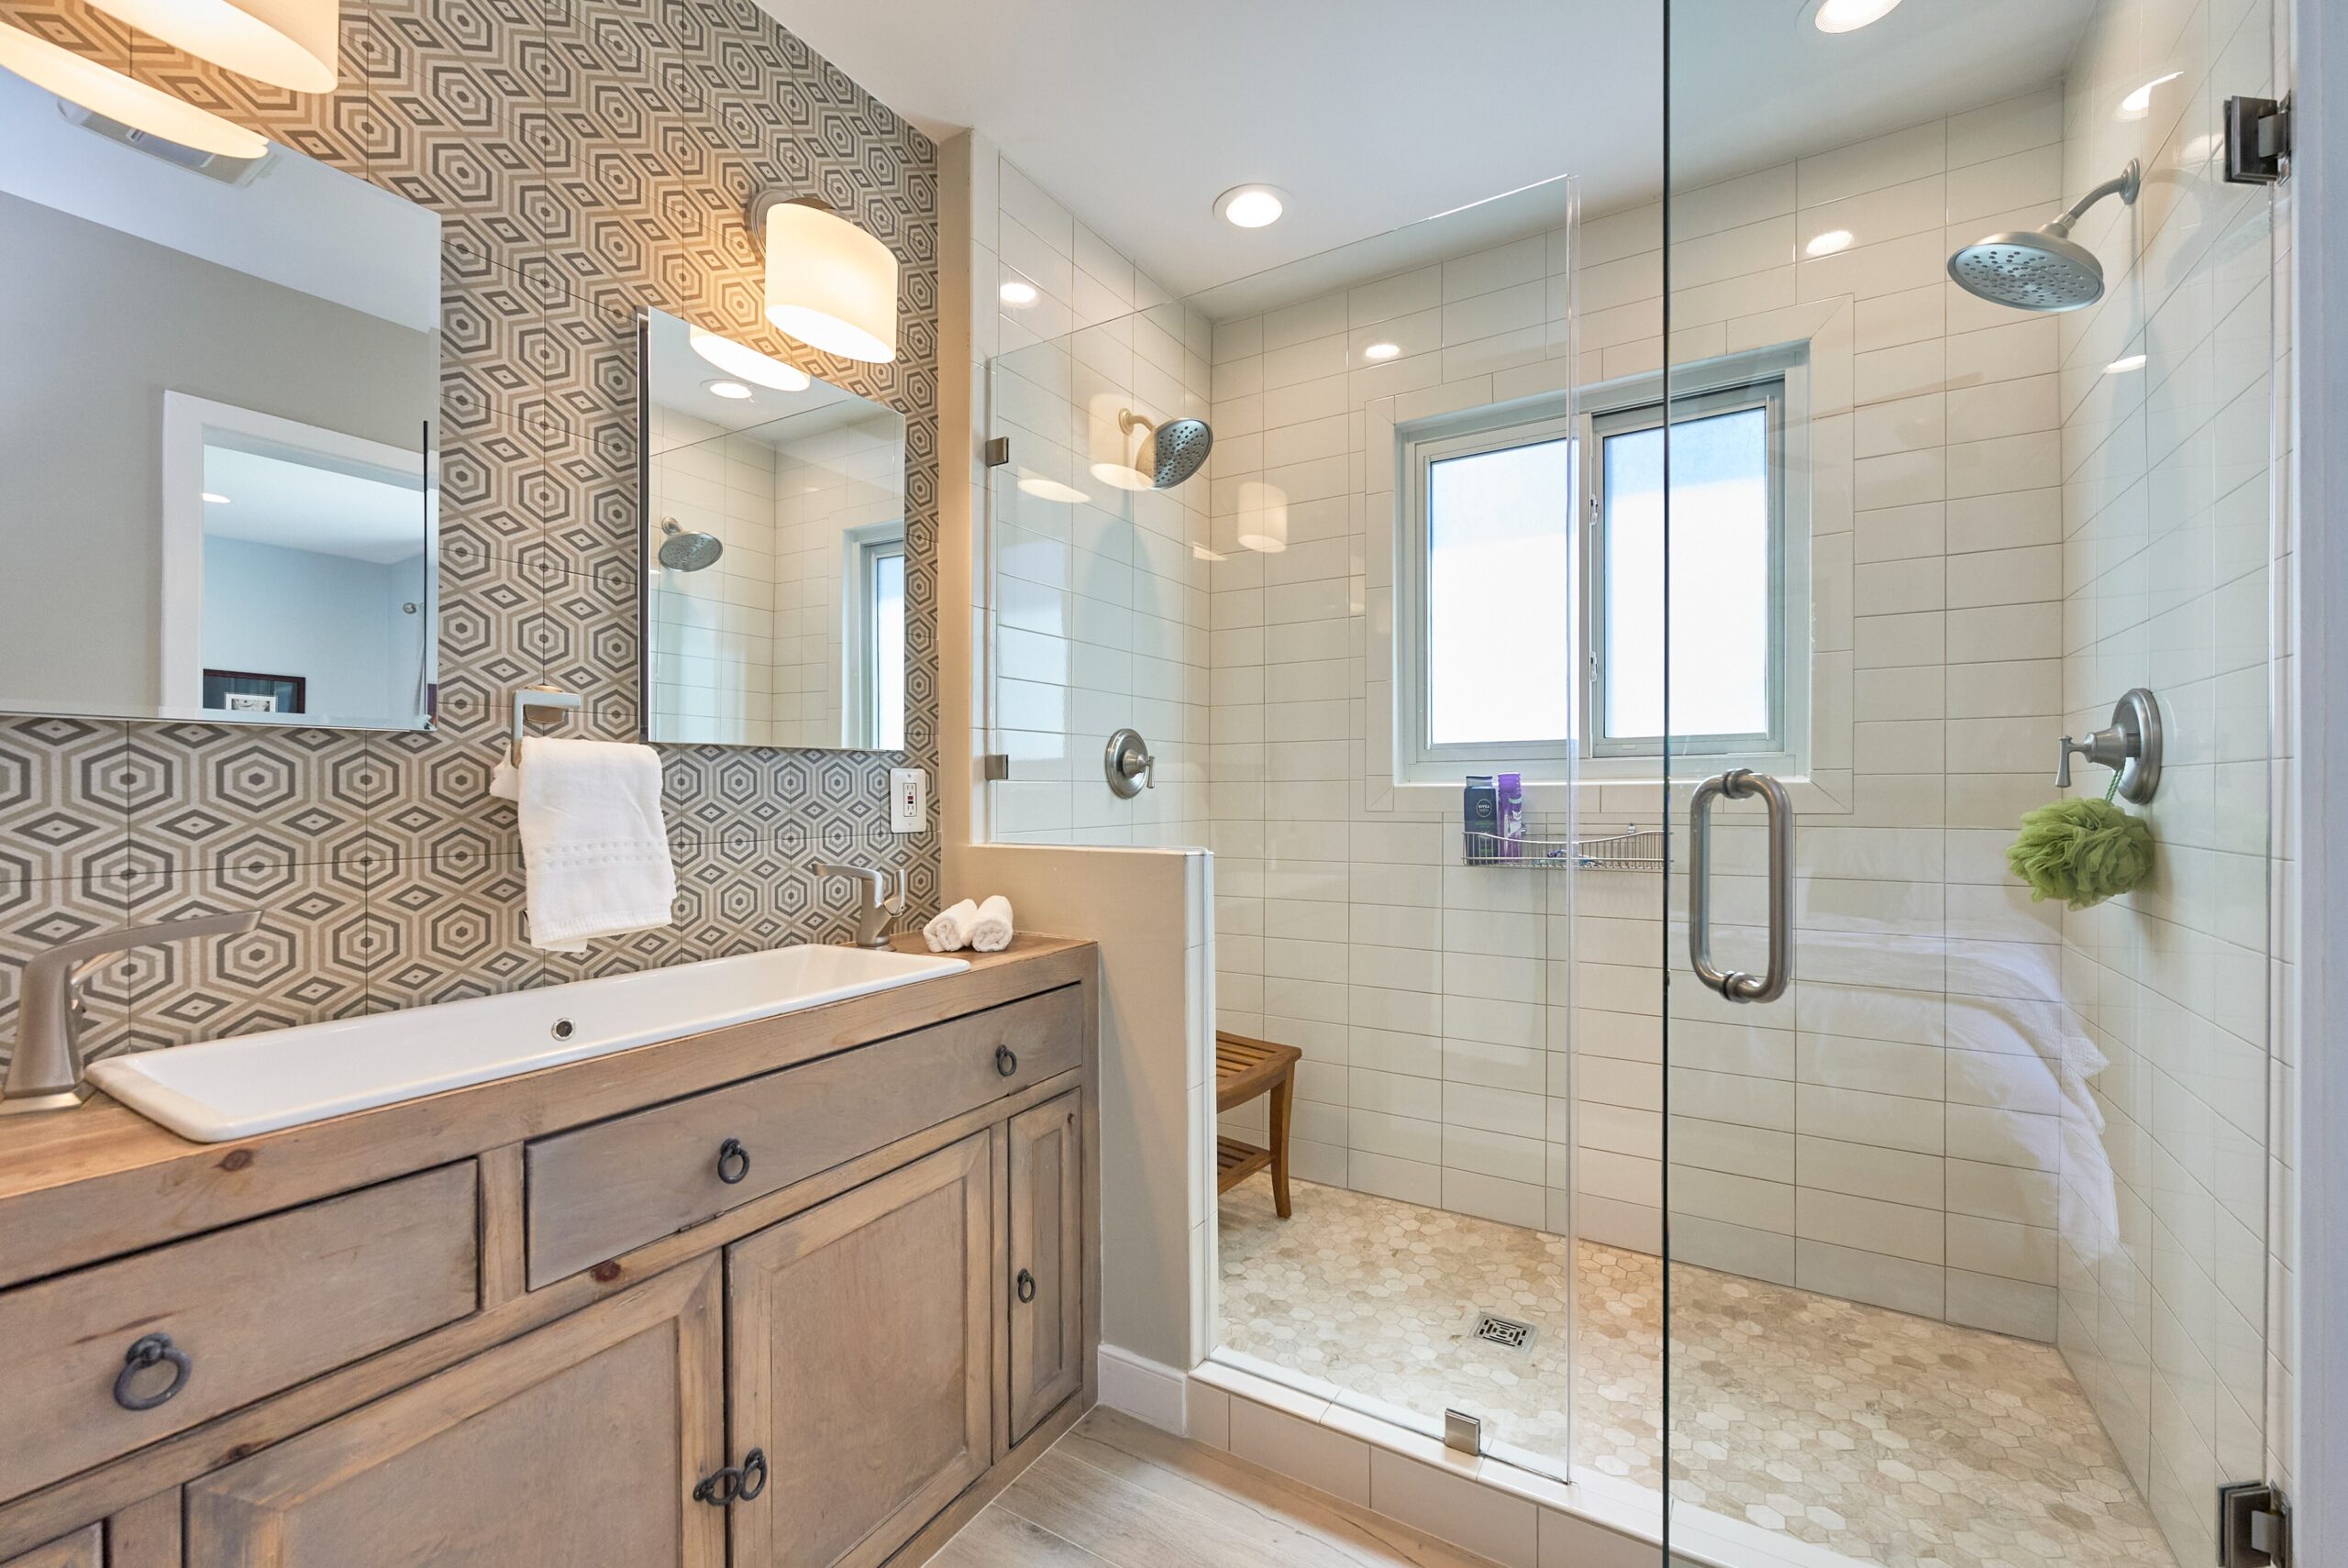 Professional photo of interior of custom home in Falls Church, Virginia. Shows remodeled bathroom with detailed tilework of various designs, large wide sink with 2 faucets in lieu of separate dual-sink vanity.